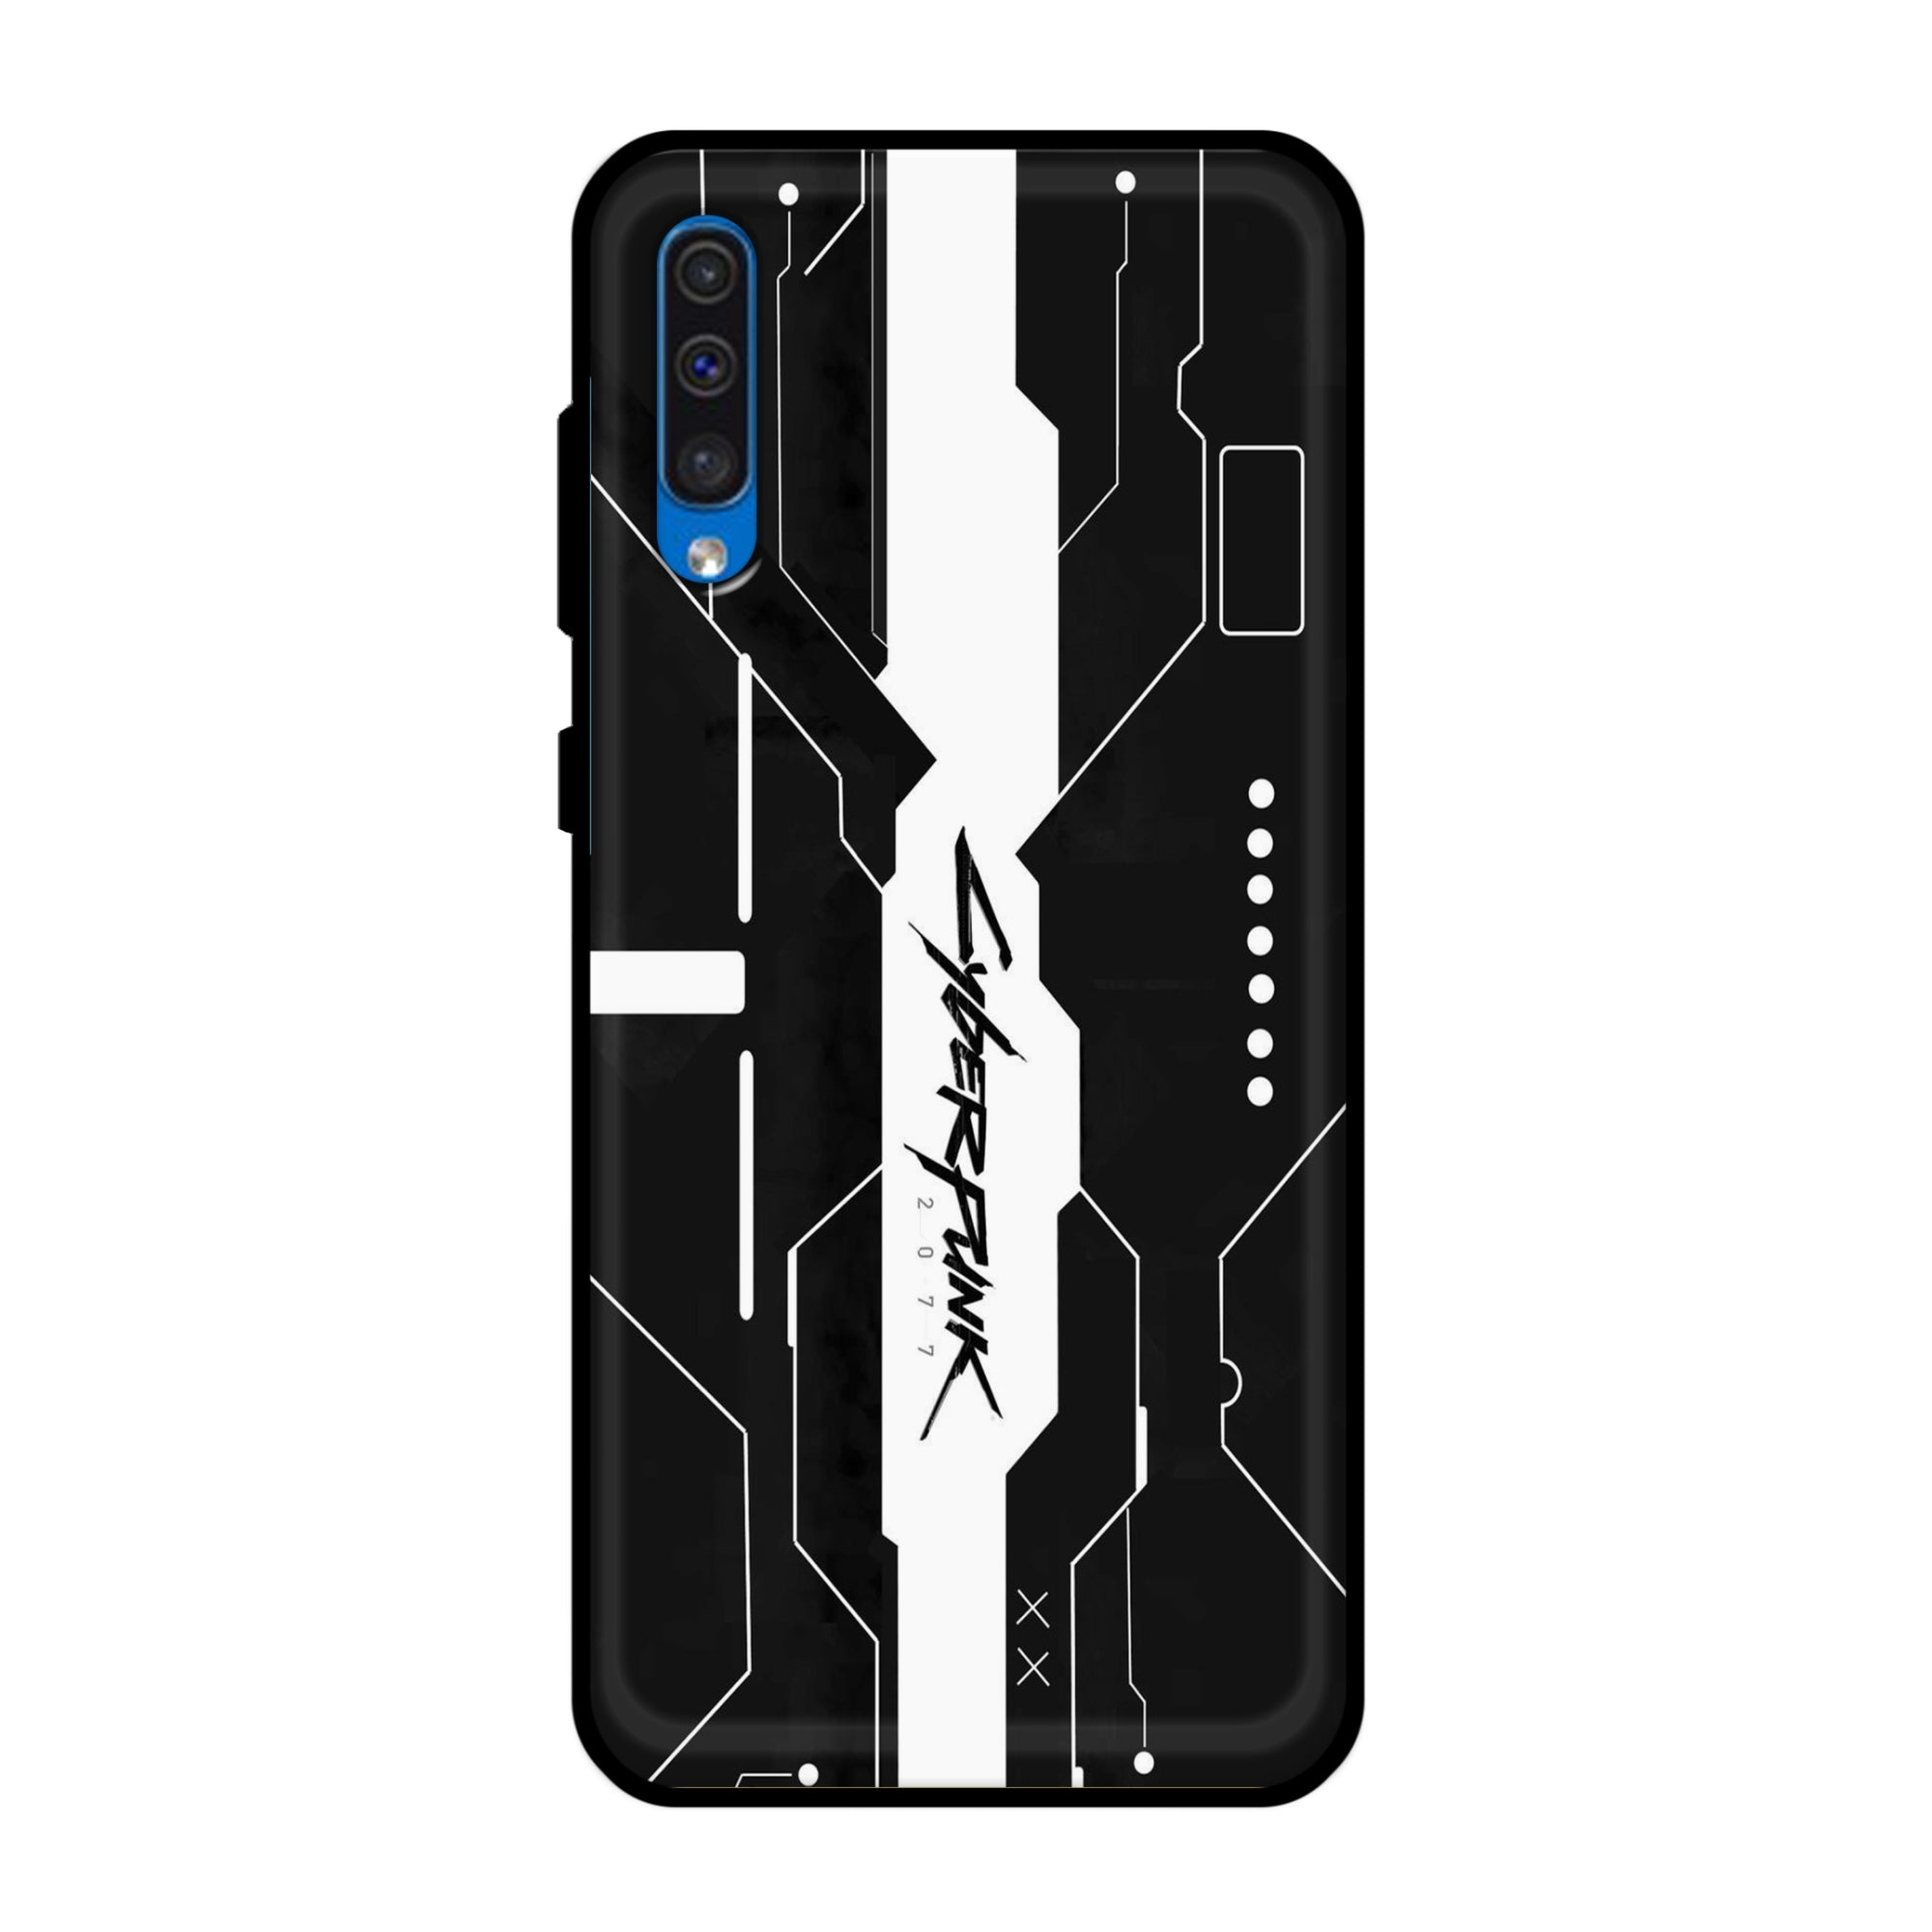 Buy Cyberpunk 2077 Art Metal-Silicon Back Mobile Phone Case/Cover For Samsung Galaxy A50 / A50s / A30s Online